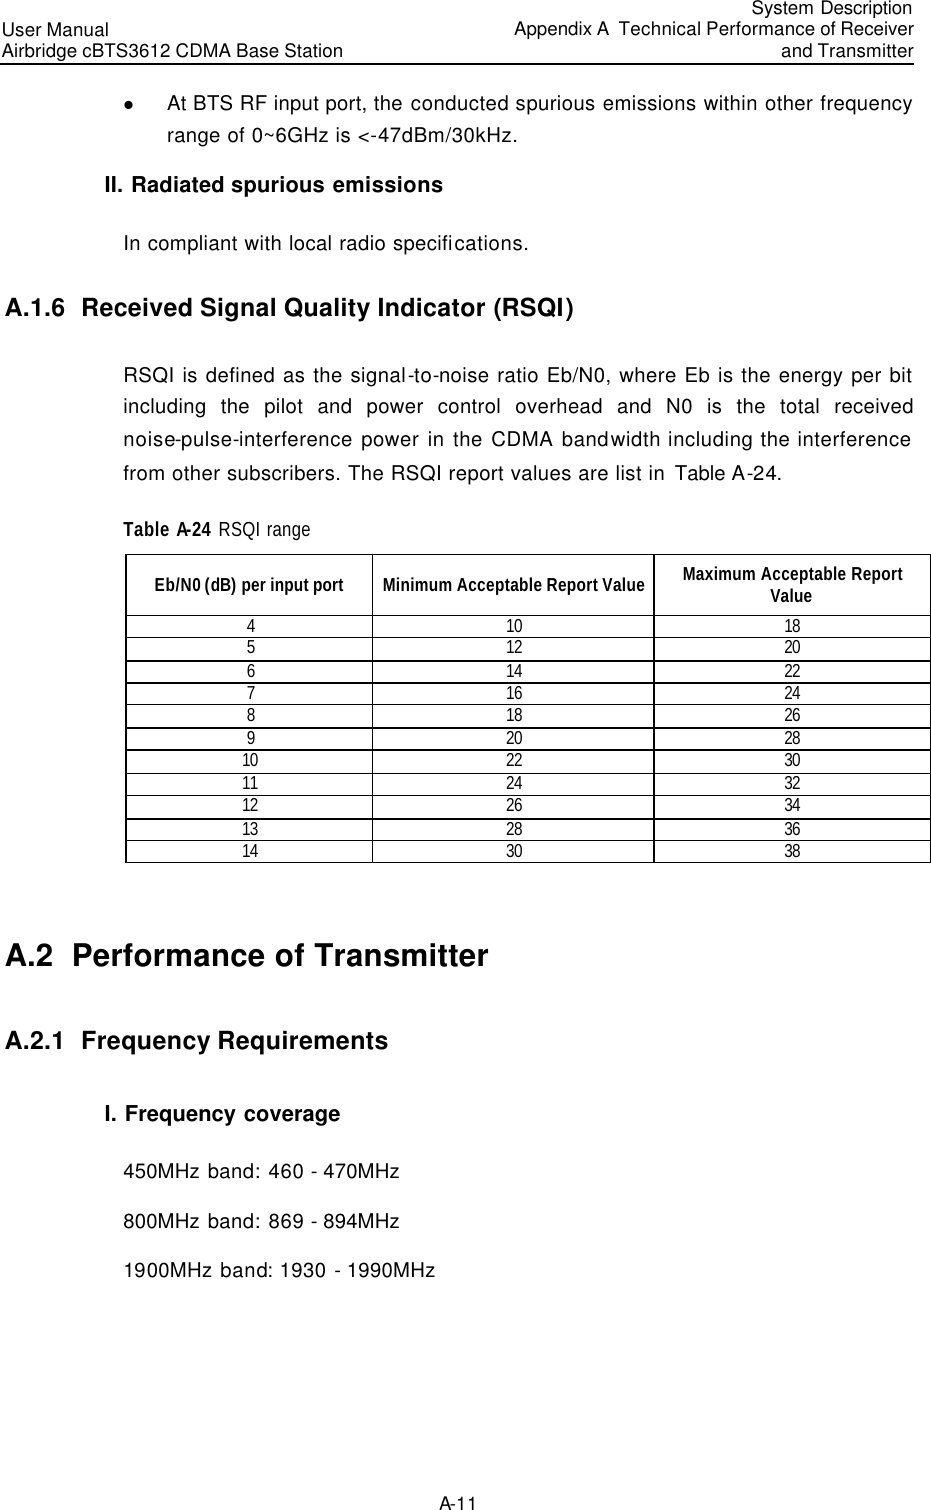 User Manual Airbridge cBTS3612 CDMA Base Station  System DescriptionAppendix A  Technical Performance of Receiver and Transmitter A-11 l At BTS RF input port, the conducted spurious emissions within other frequency range of 0~6GHz is &lt;-47dBm/30kHz.  II. Radiated spurious emissions  In compliant with local radio specifications. A.1.6  Received Signal Quality Indicator (RSQI) RSQI is defined as the signal-to-noise ratio Eb/N0, where Eb is the energy per bit including the pilot and power control overhead and N0 is the total received noise-pulse-interference power in the CDMA bandwidth including the interference from other subscribers. The RSQI report values are list in Table A-24. Table A-24 RSQI range Eb/N0 (dB) per input port Minimum Acceptable Report Value Maximum Acceptable Report Value 4 10 18 5 12 20 6 14 22 7 16 24 8 18 26 9 20 28 10 22 30 11 24 32 12 26 34 13 28 36 14 30 38  A.2  Performance of Transmitter  A.2.1  Frequency Requirements I. Frequency coverage 450MHz band: 460 - 470MHz 800MHz band: 869 - 894MHz 1900MHz band: 1930 - 1990MHz 